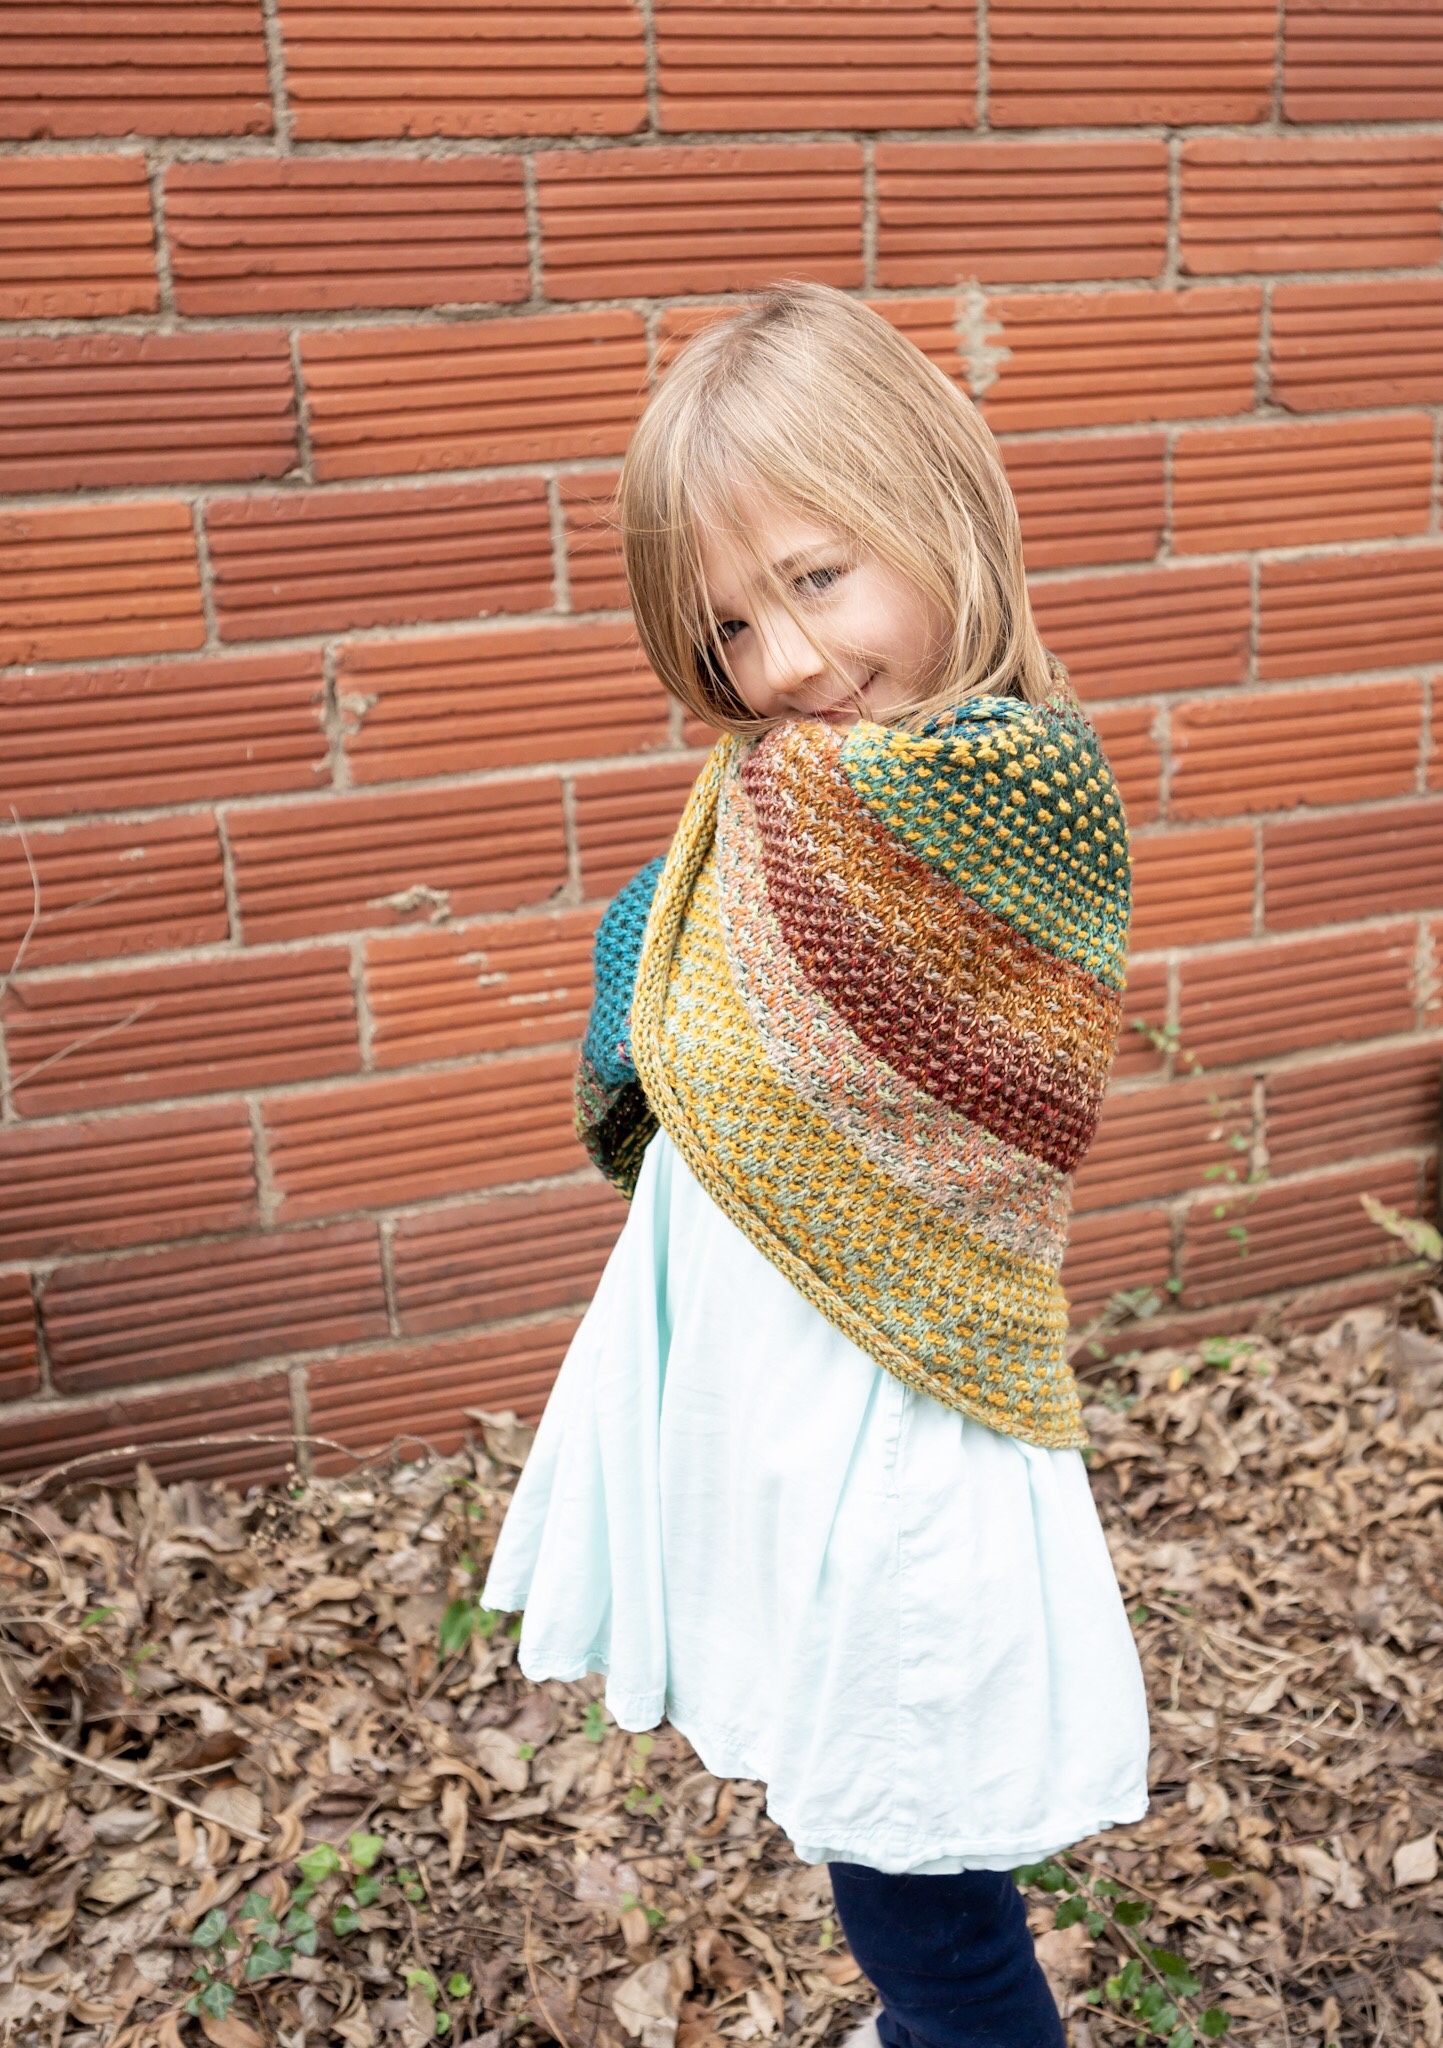 A slightly smaller shawl | knit the hell out